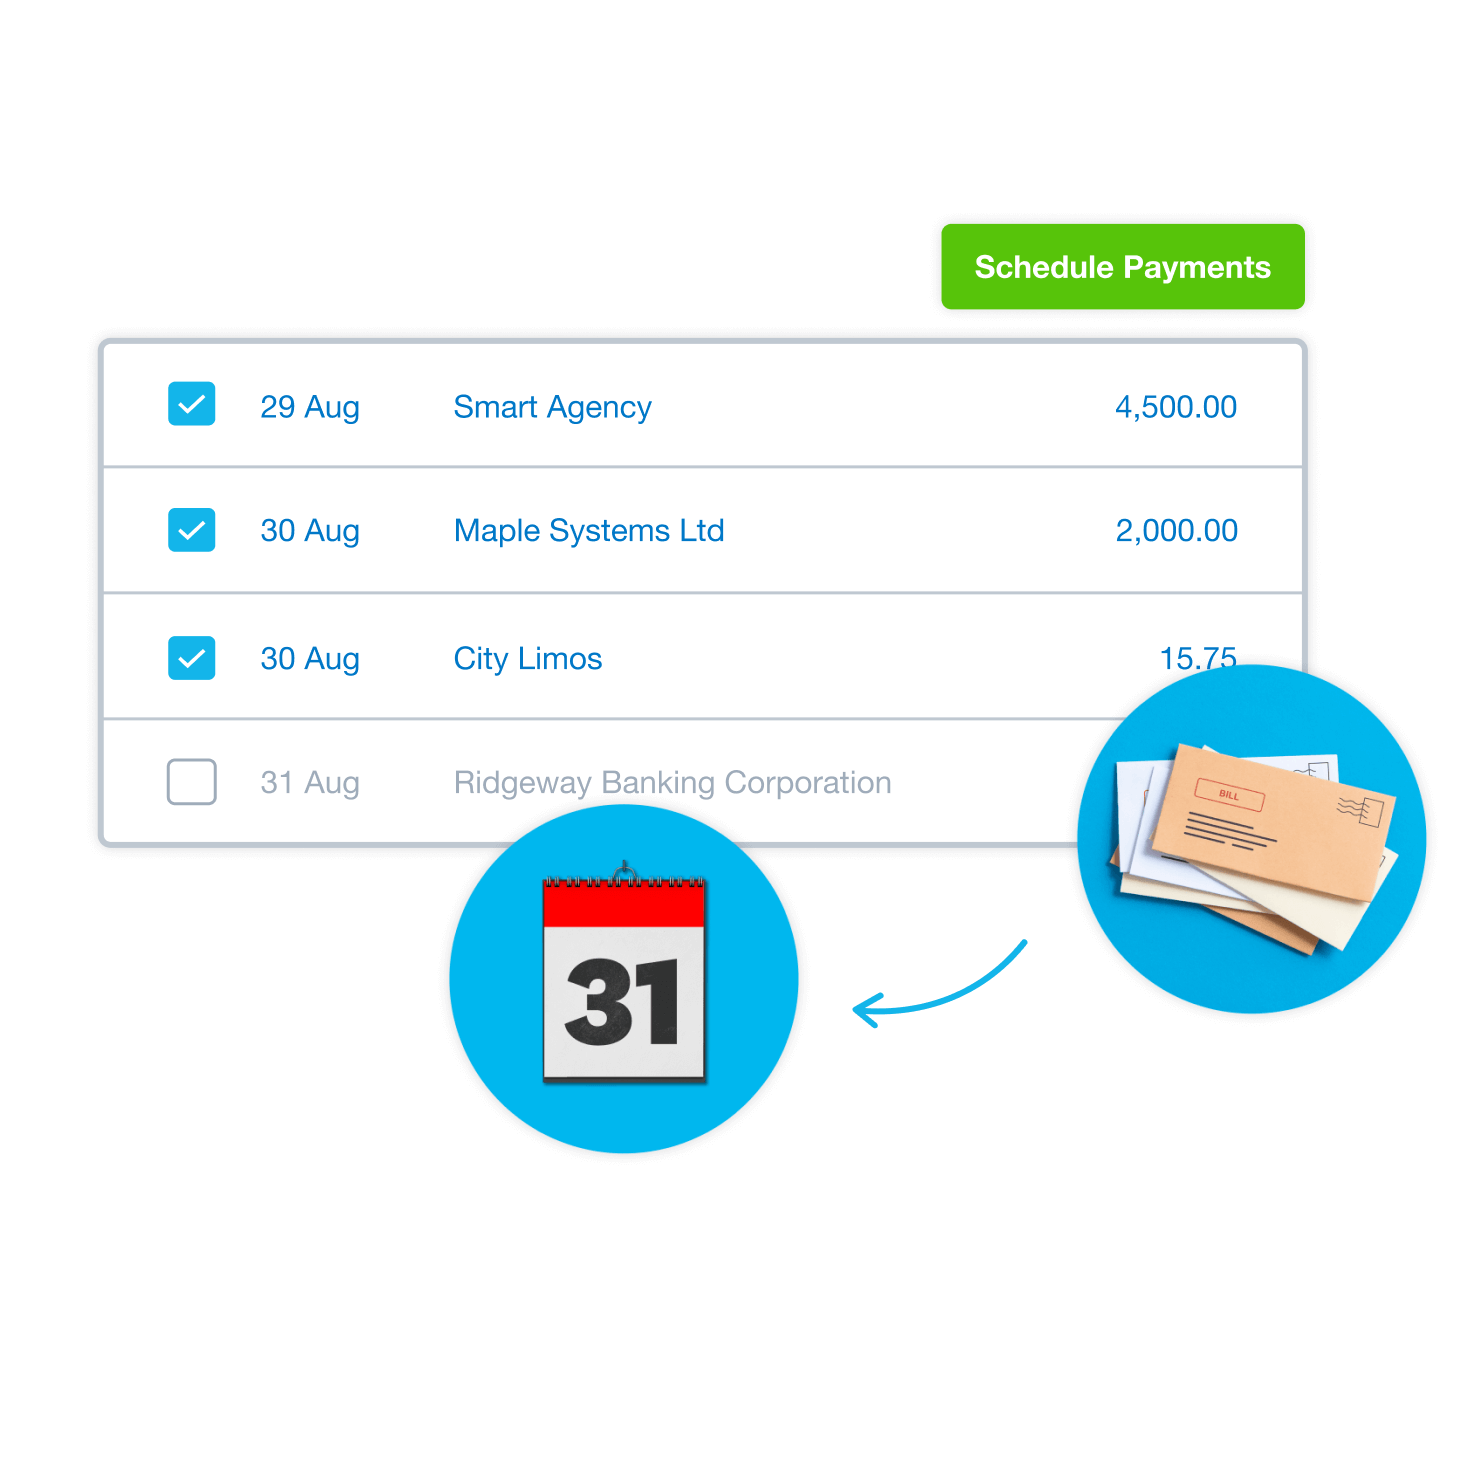 Xero’s accounting software shows a list of bills for payment along with due dates.